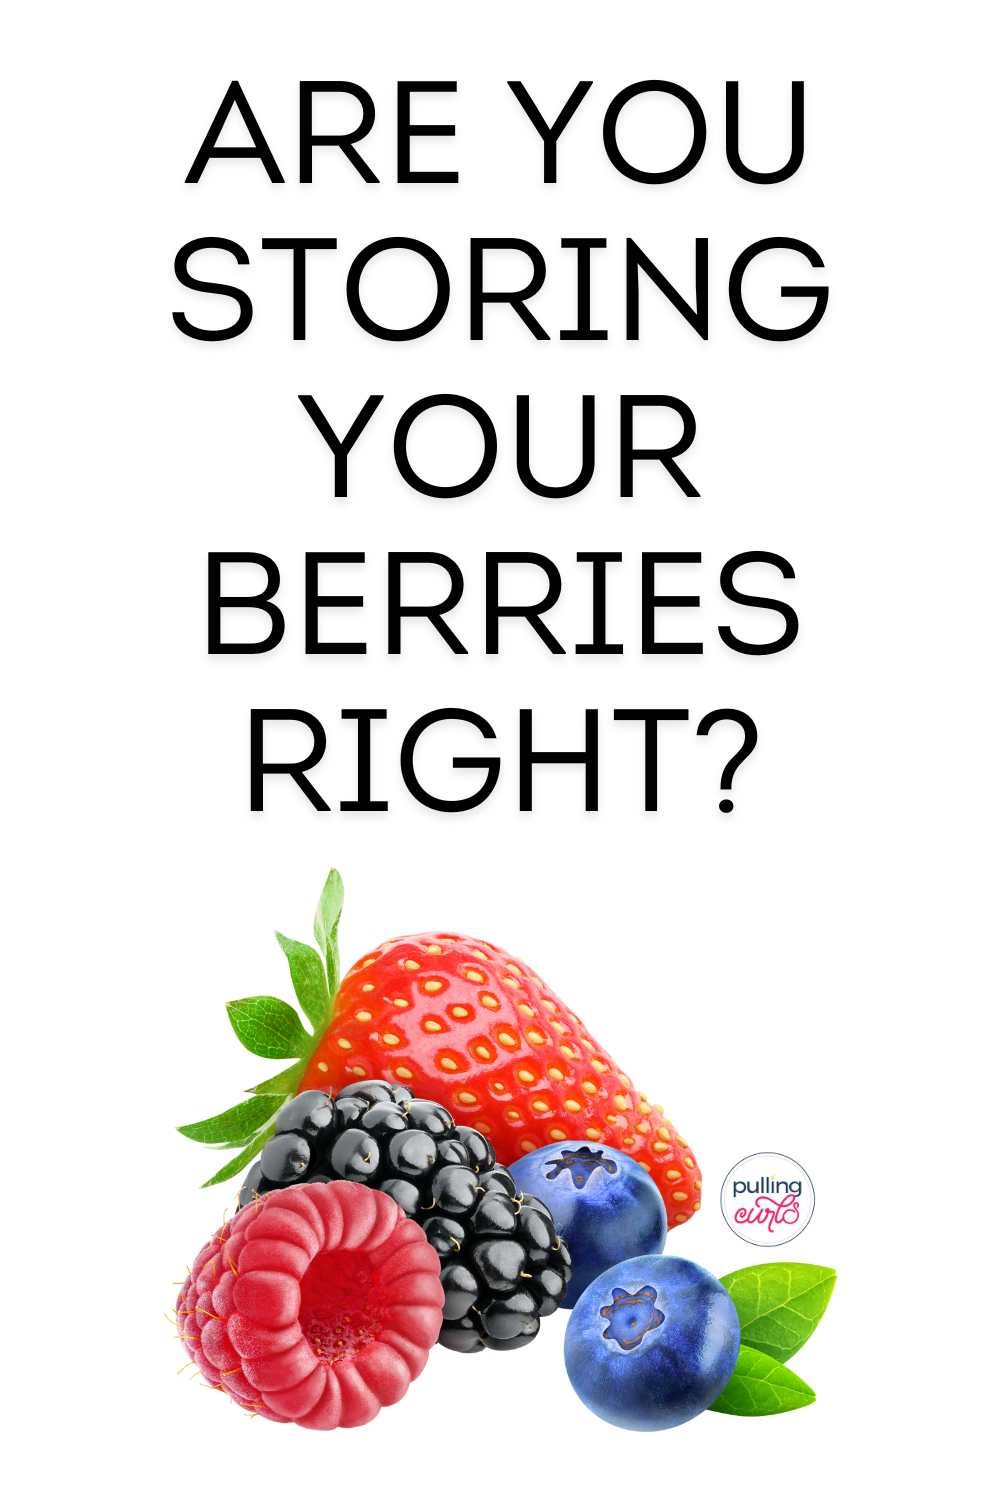 image of some berries / are you storing your berries right? via @pullingcurls